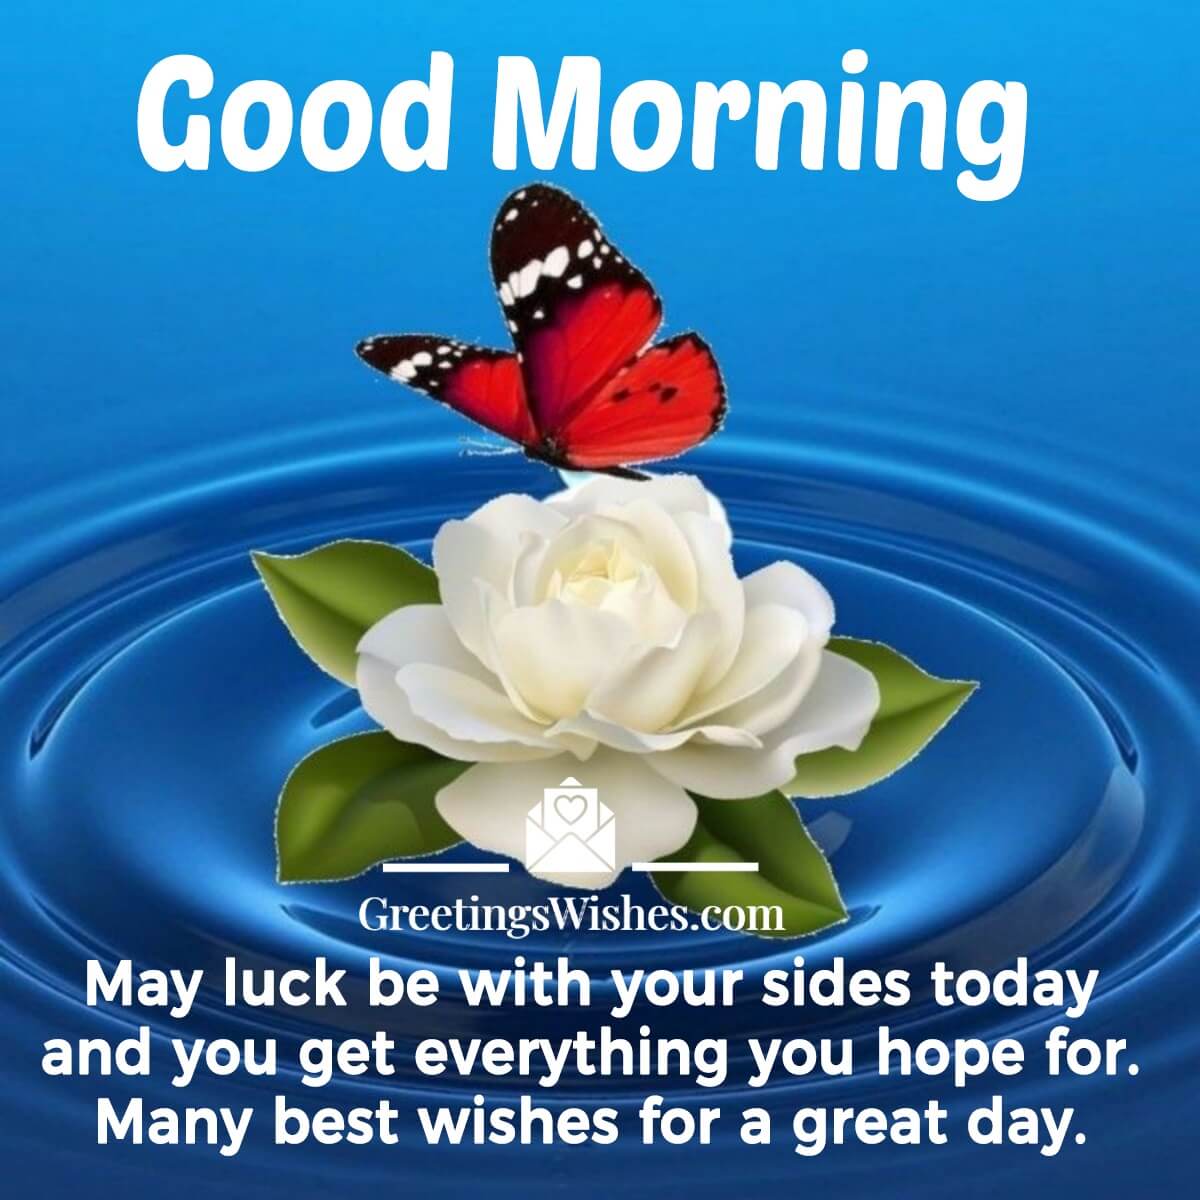 Best Wishes For A Great Day.